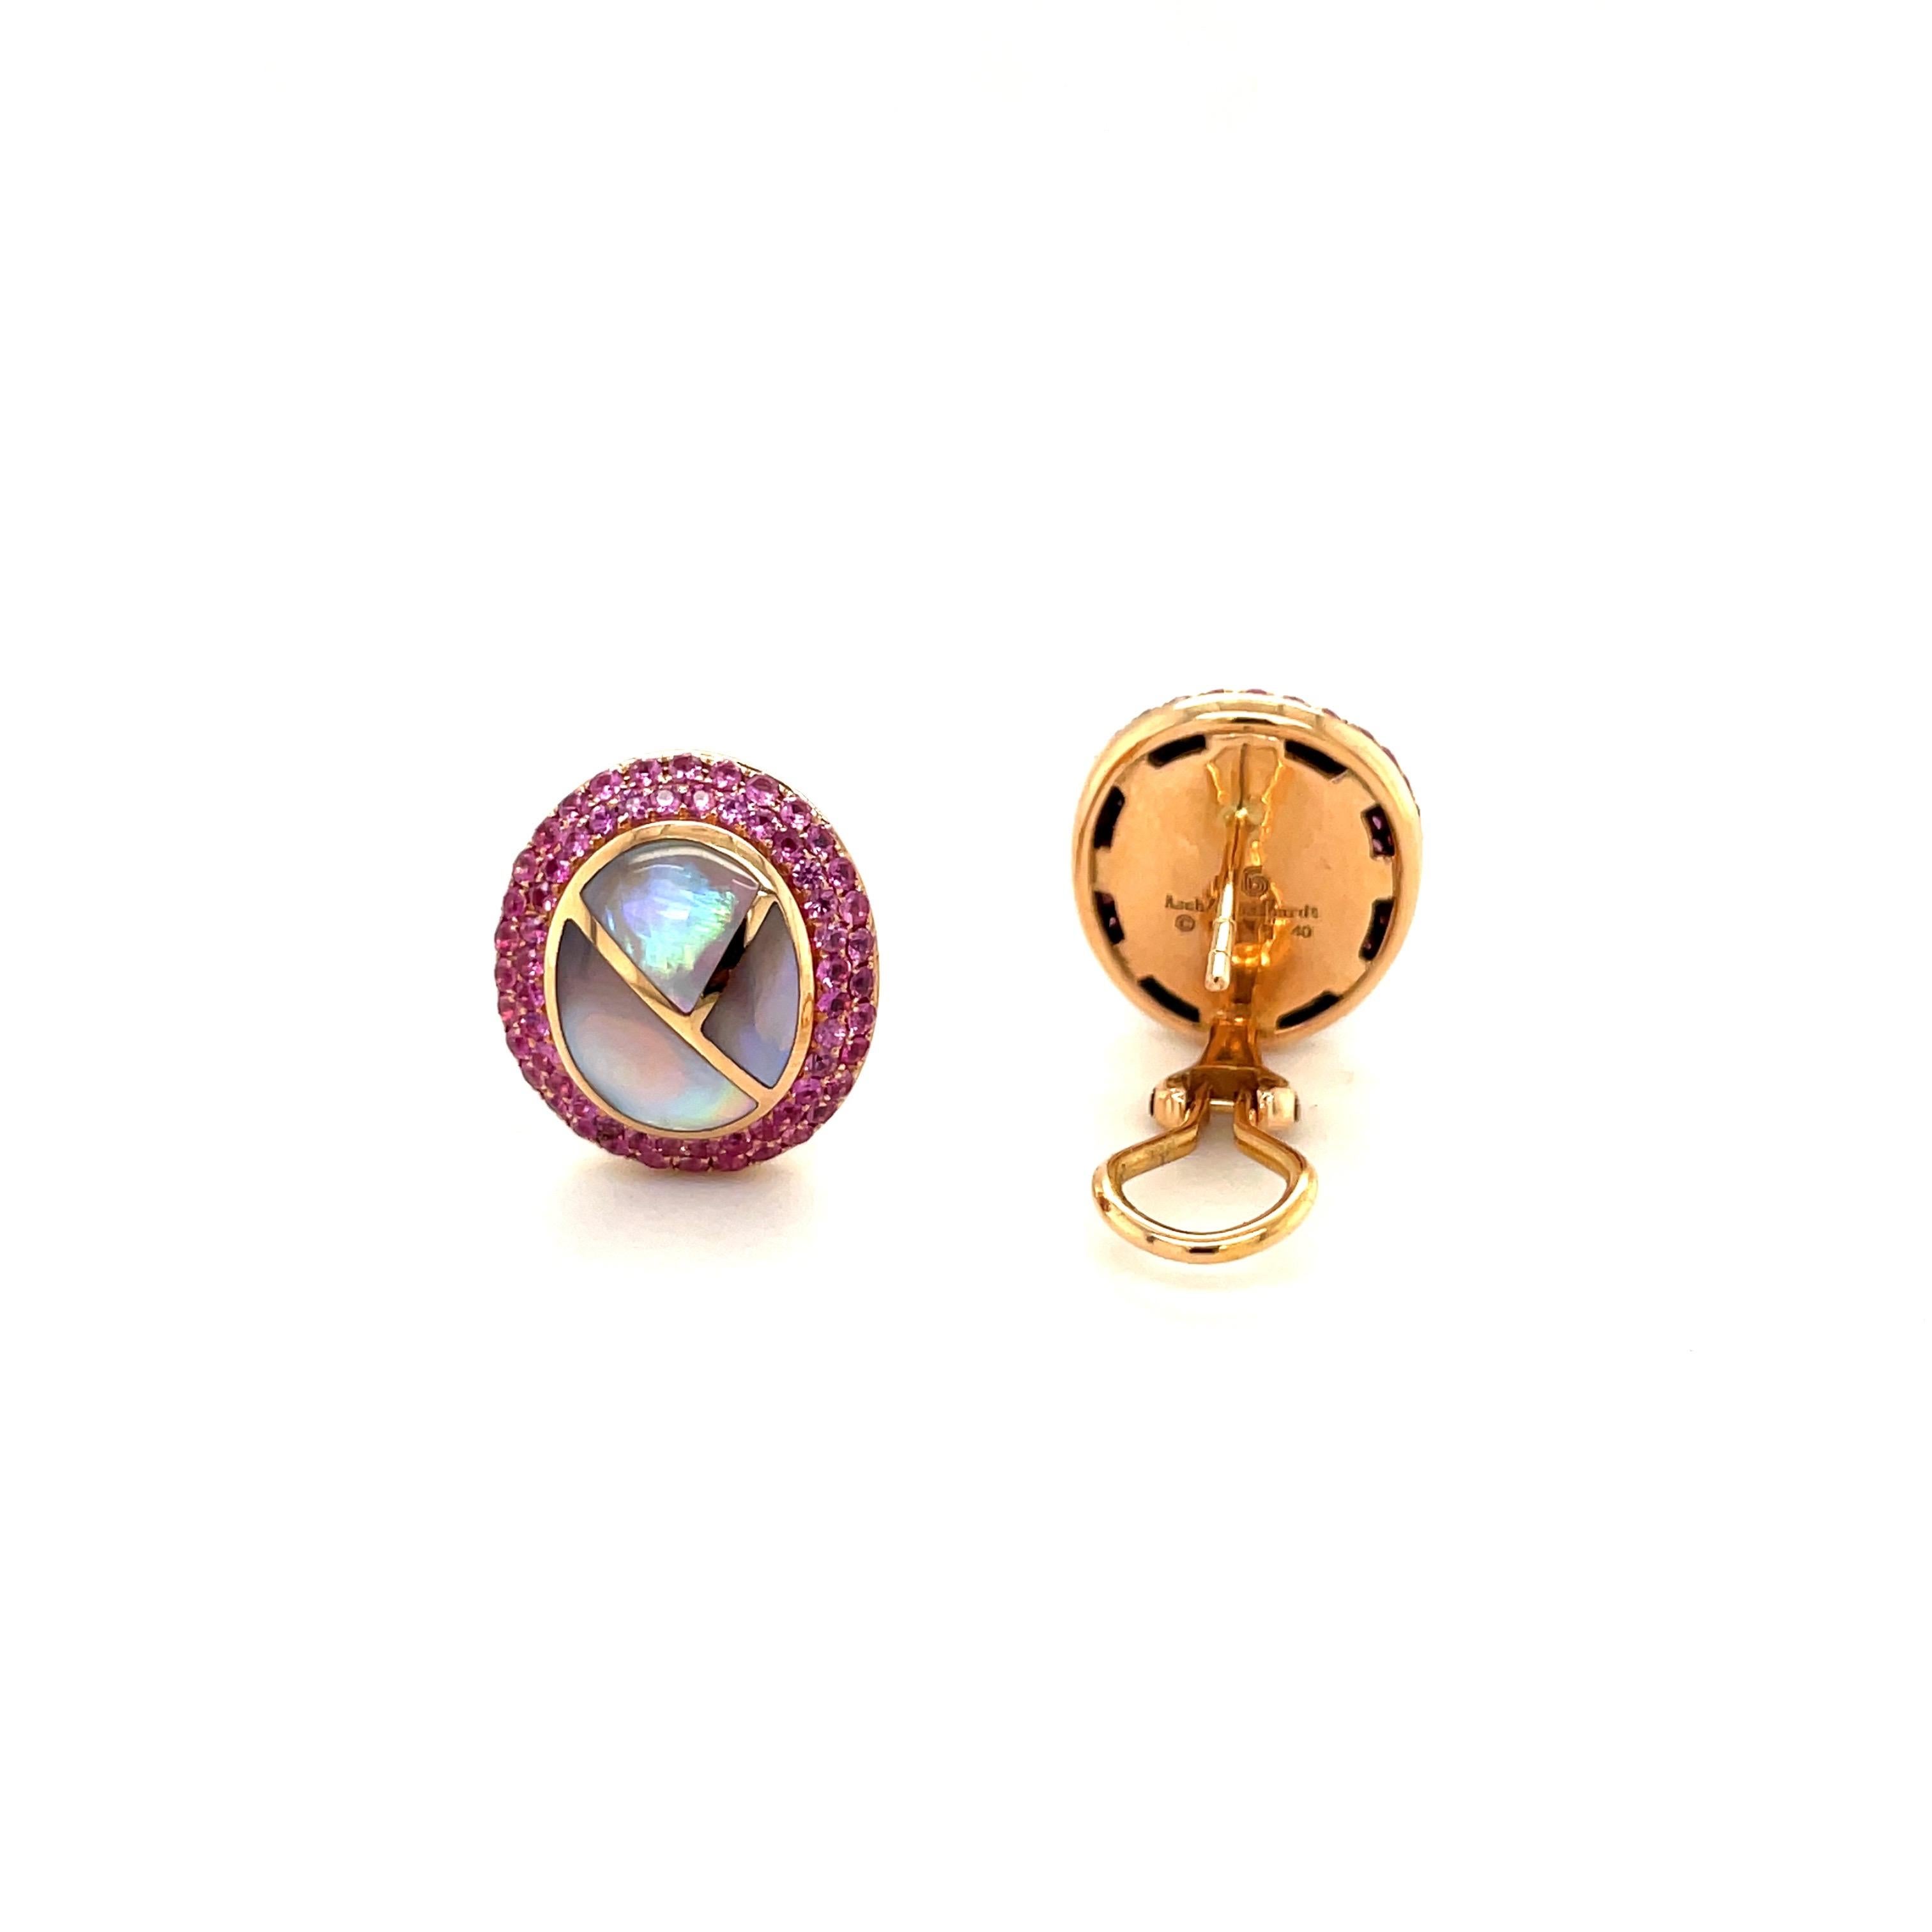 Gorgeous earrings for the pink lover. These 18 karat rose gold oval earrings are set with 2 rows of round pink sapphires. The center of the earrings have been inlaid with shapes in pink mother of pearl, giving these earrings a beautiful contrast.